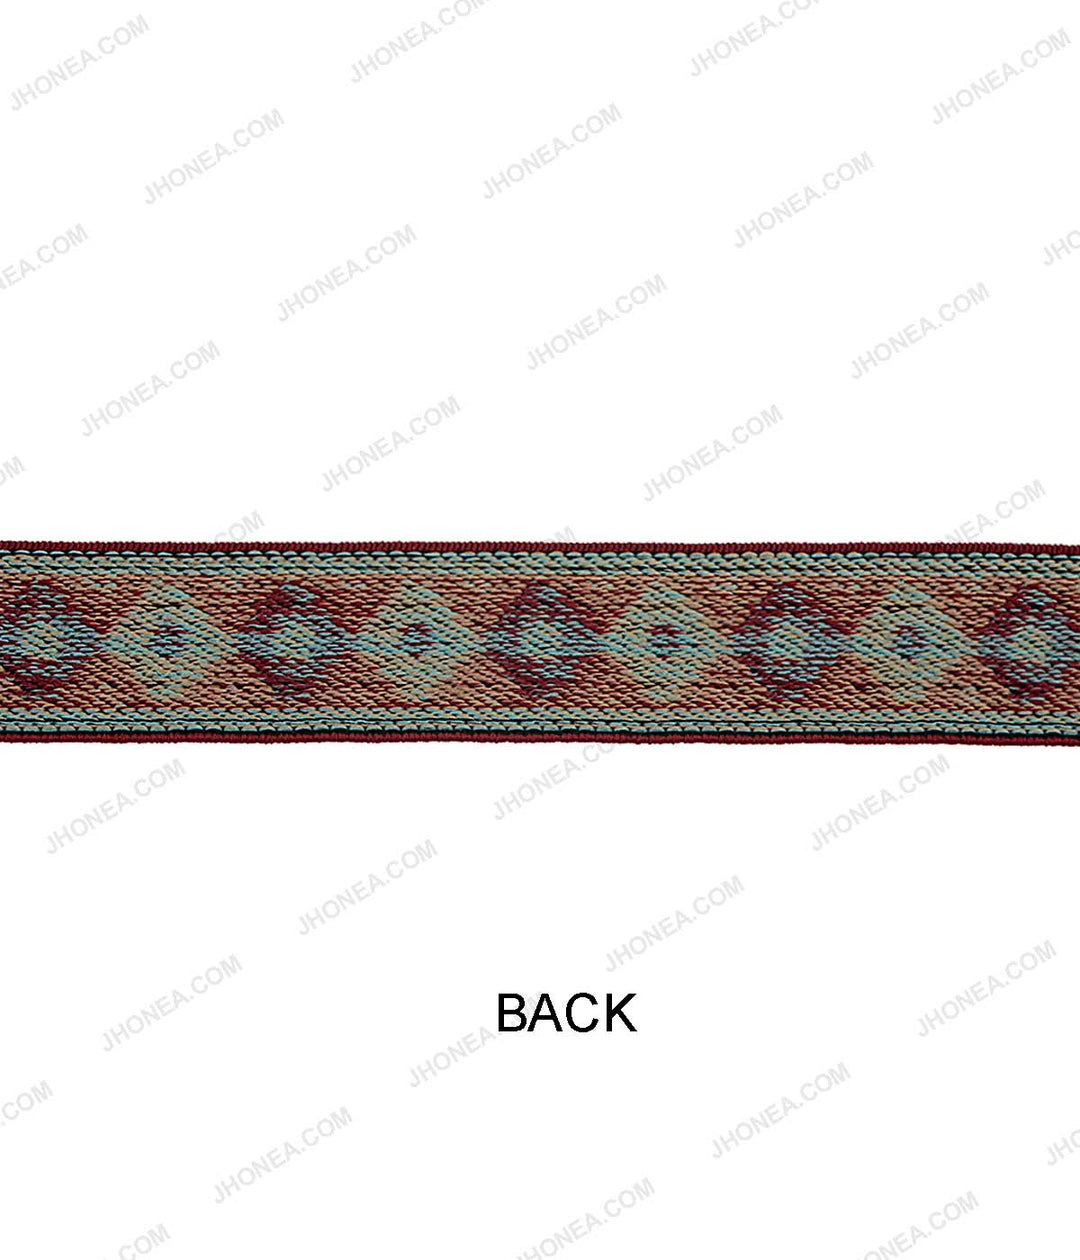 Soft Multicolor Jacquard Woven Patterned Elastic for Designers